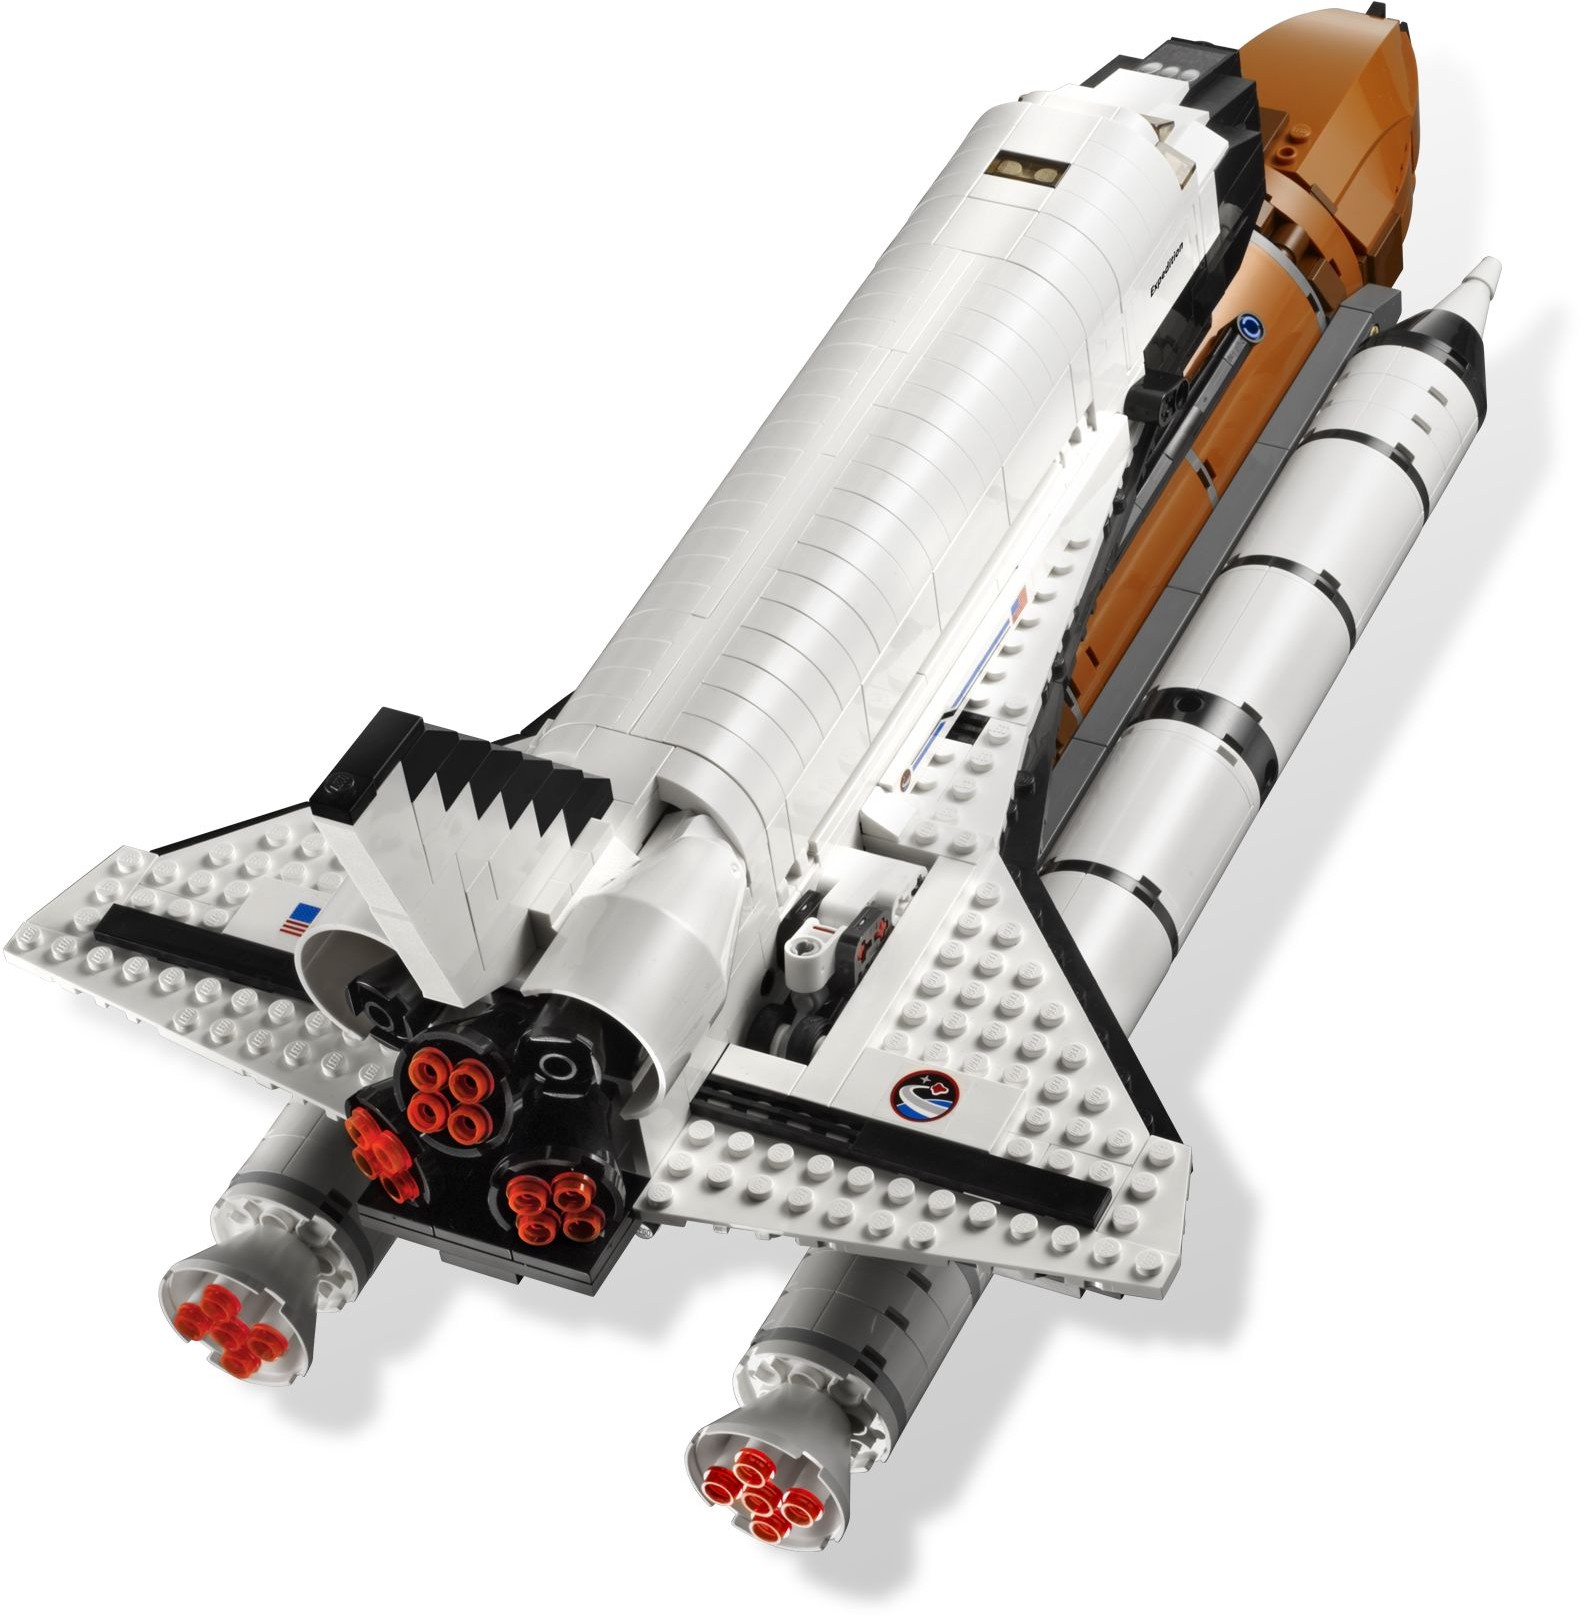 Brand New Shuttle Space Shuttle Expedition 10231 UA Block Set Gift DHL SHIPPING 